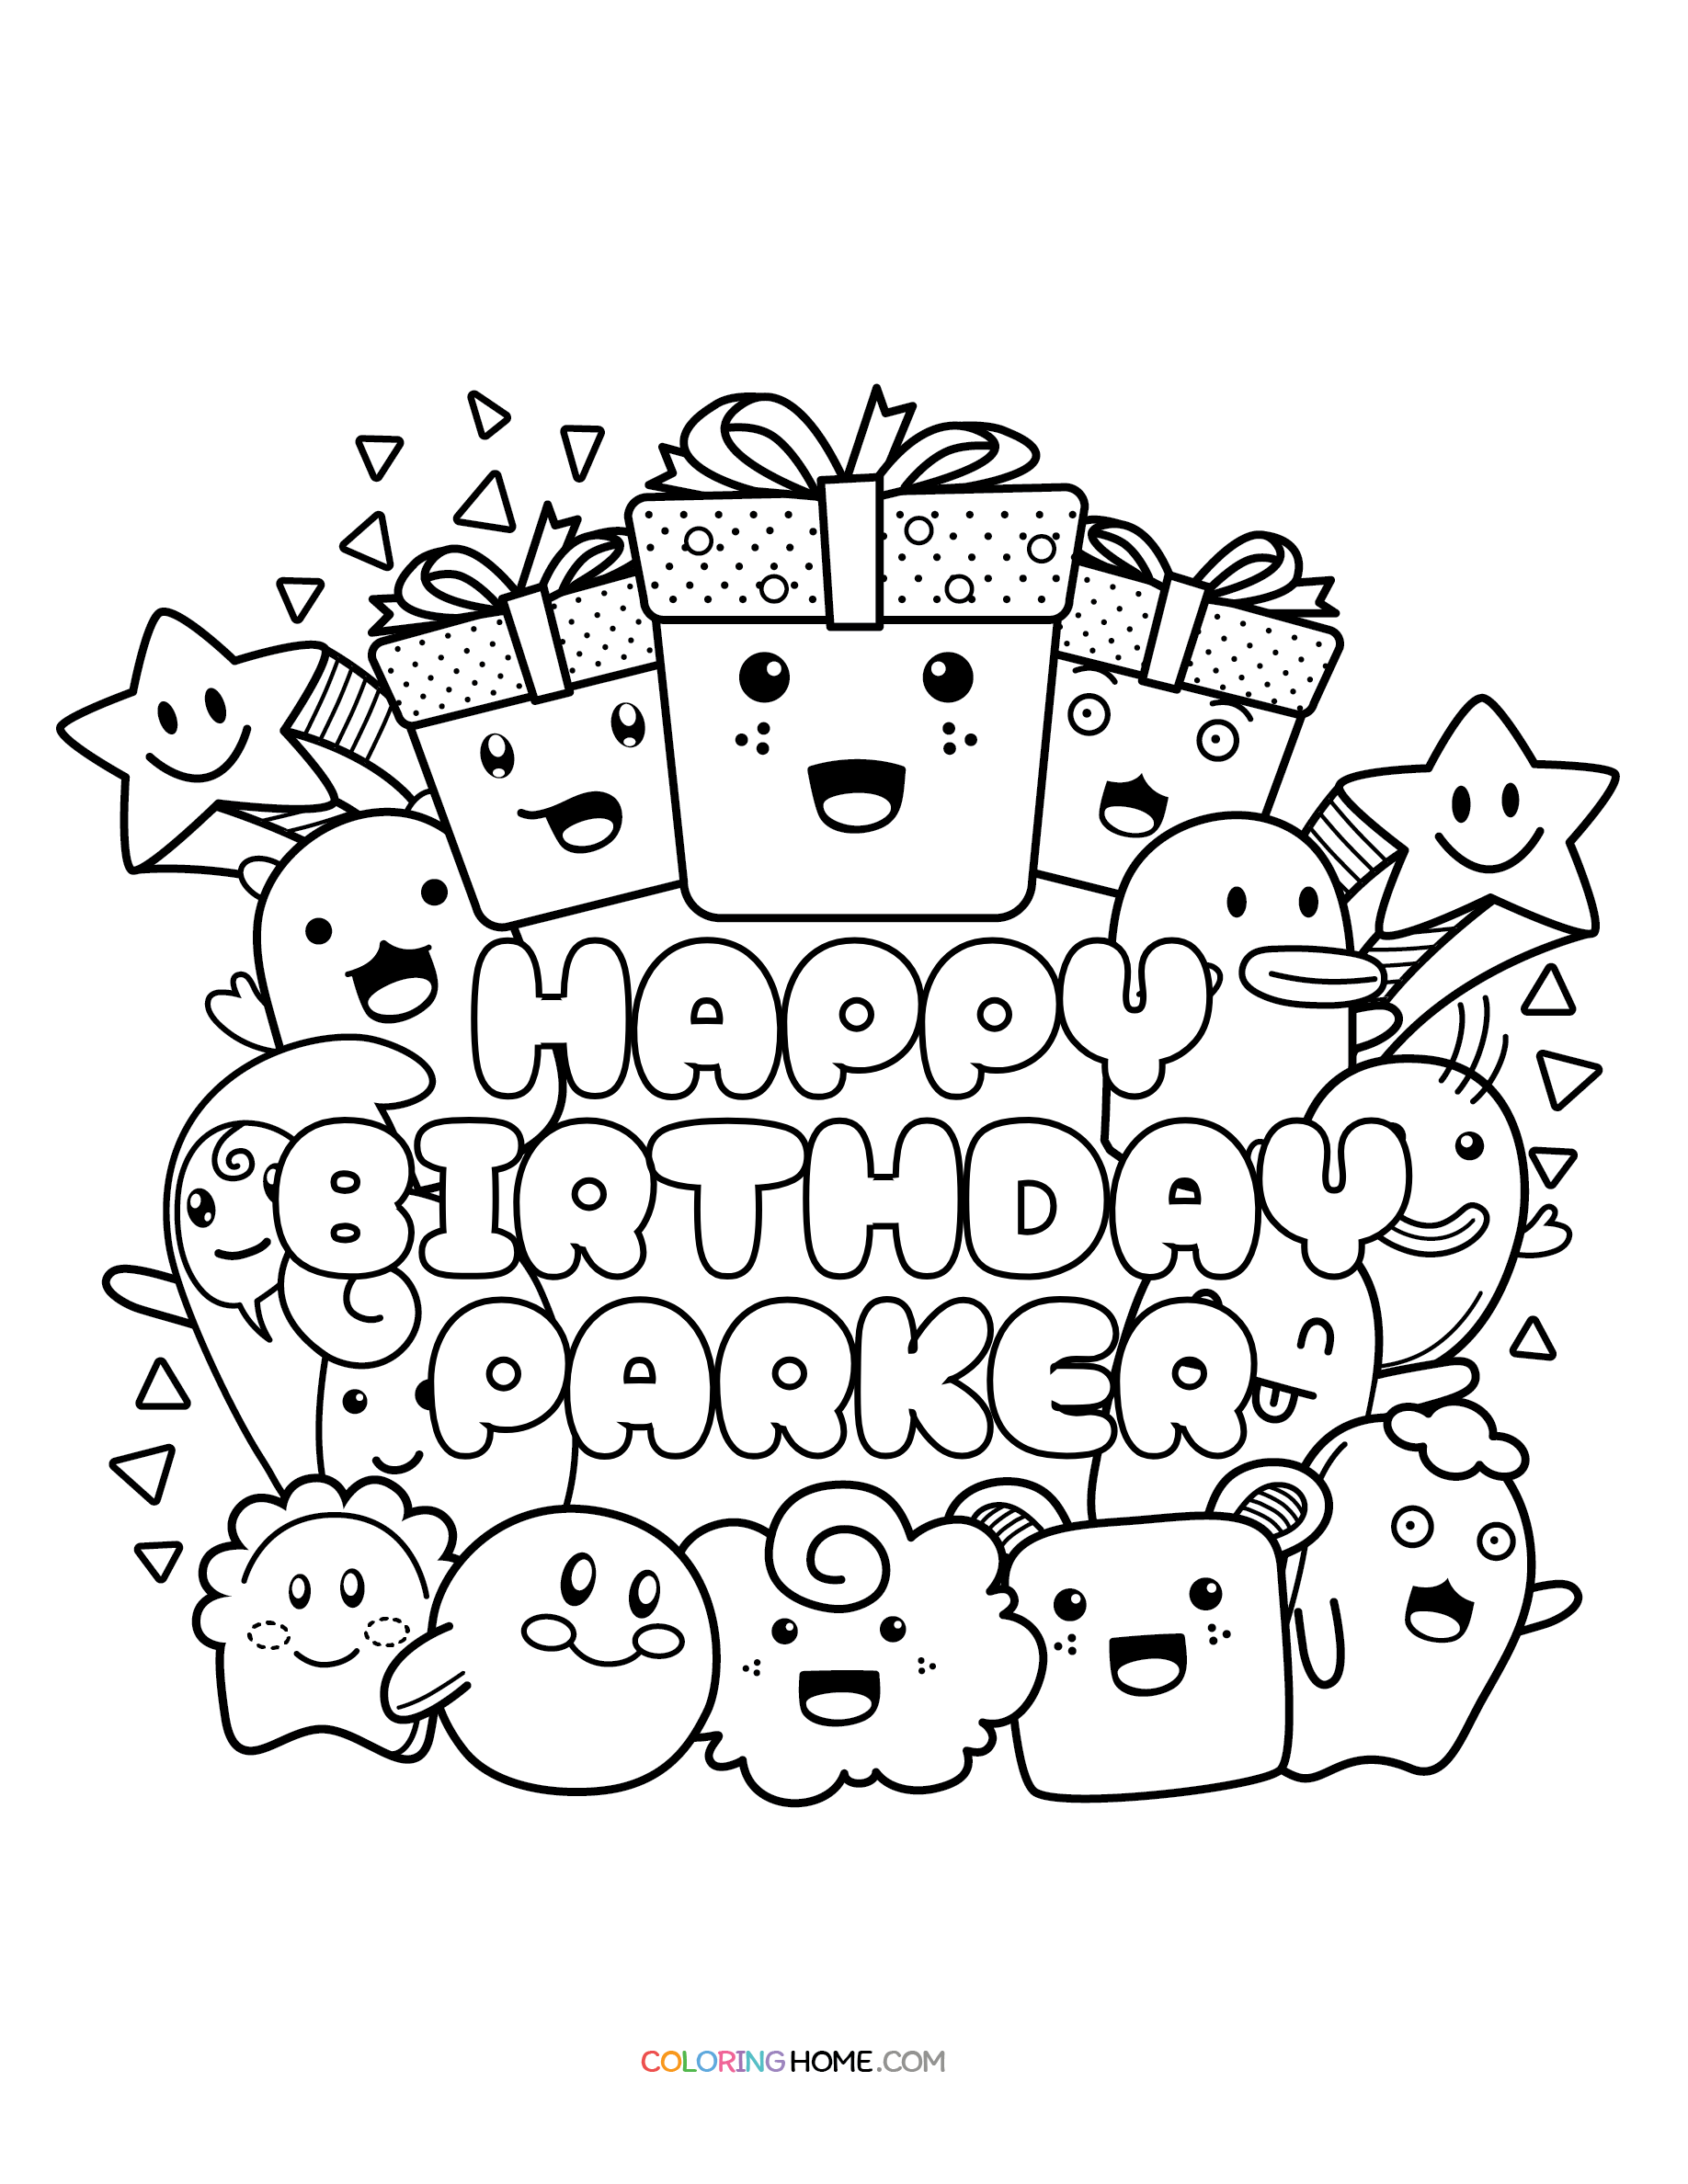 Happy Birthday Parker coloring page